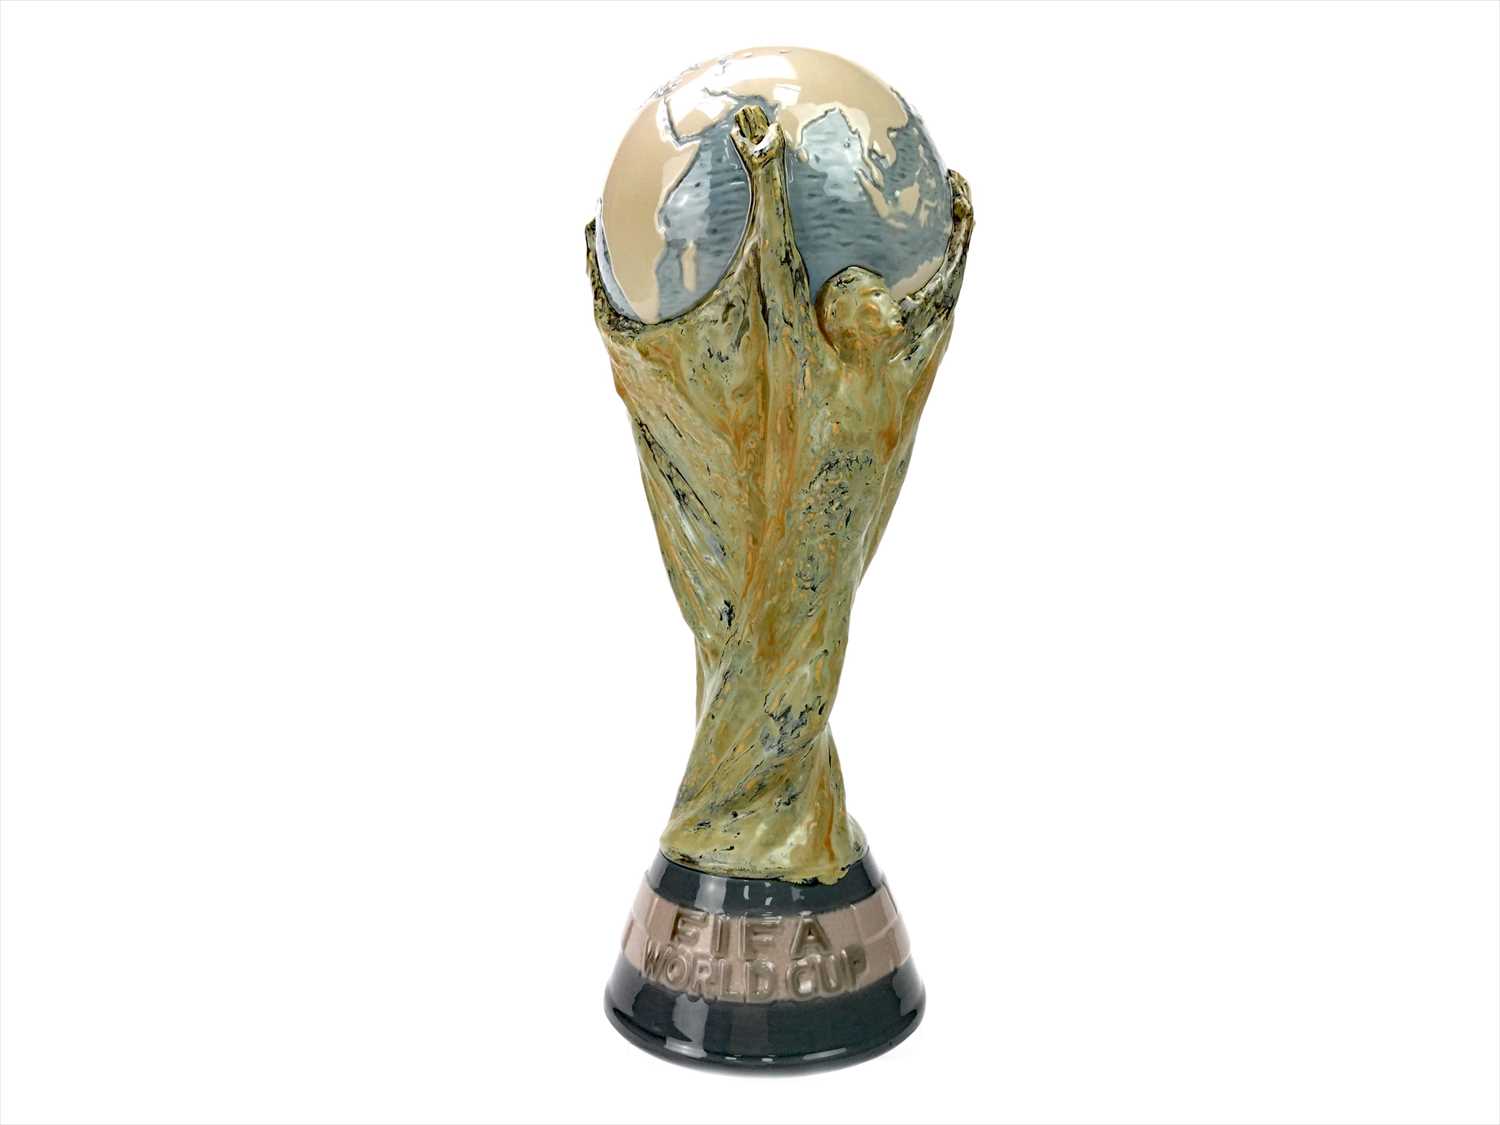 Lot 1711 - A LLADRO PORCELAIN MODEL OF THE FIFA WORLD CUP TROPHY